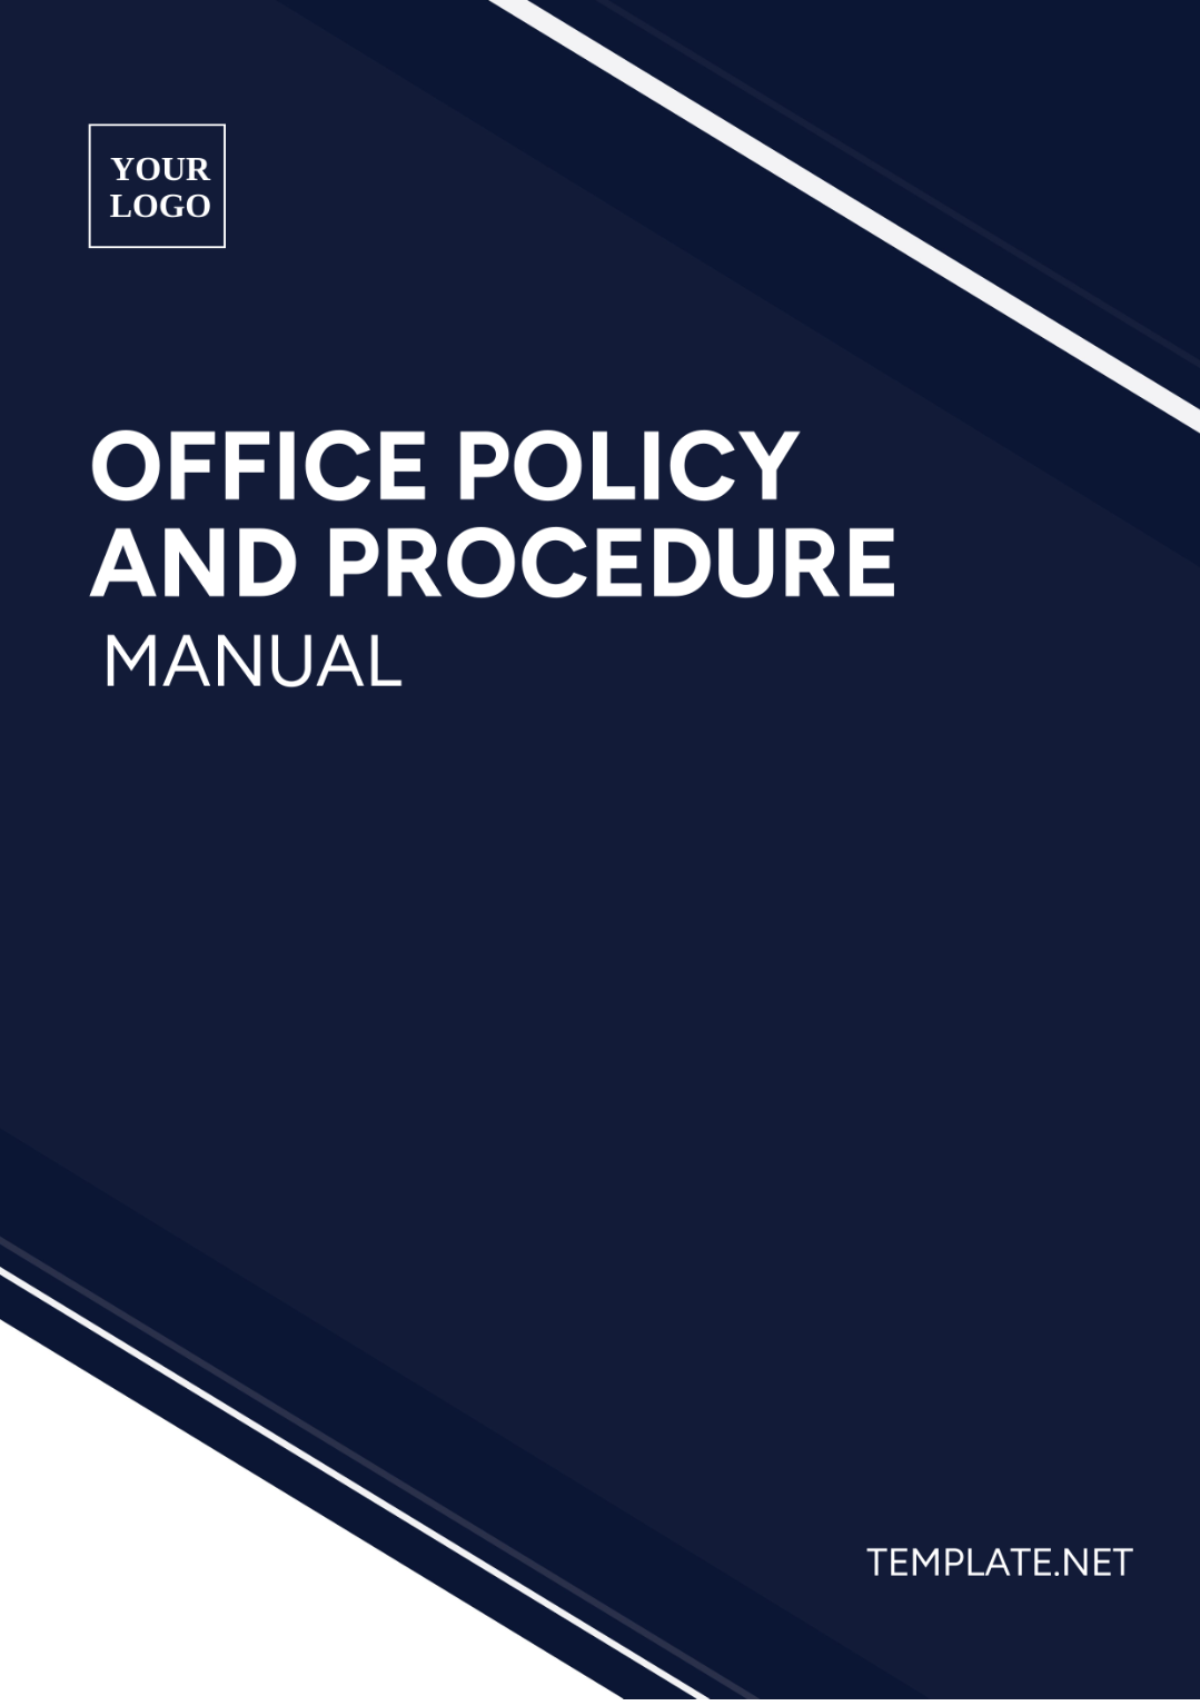 Free Office Policy and Procedure Manual Template